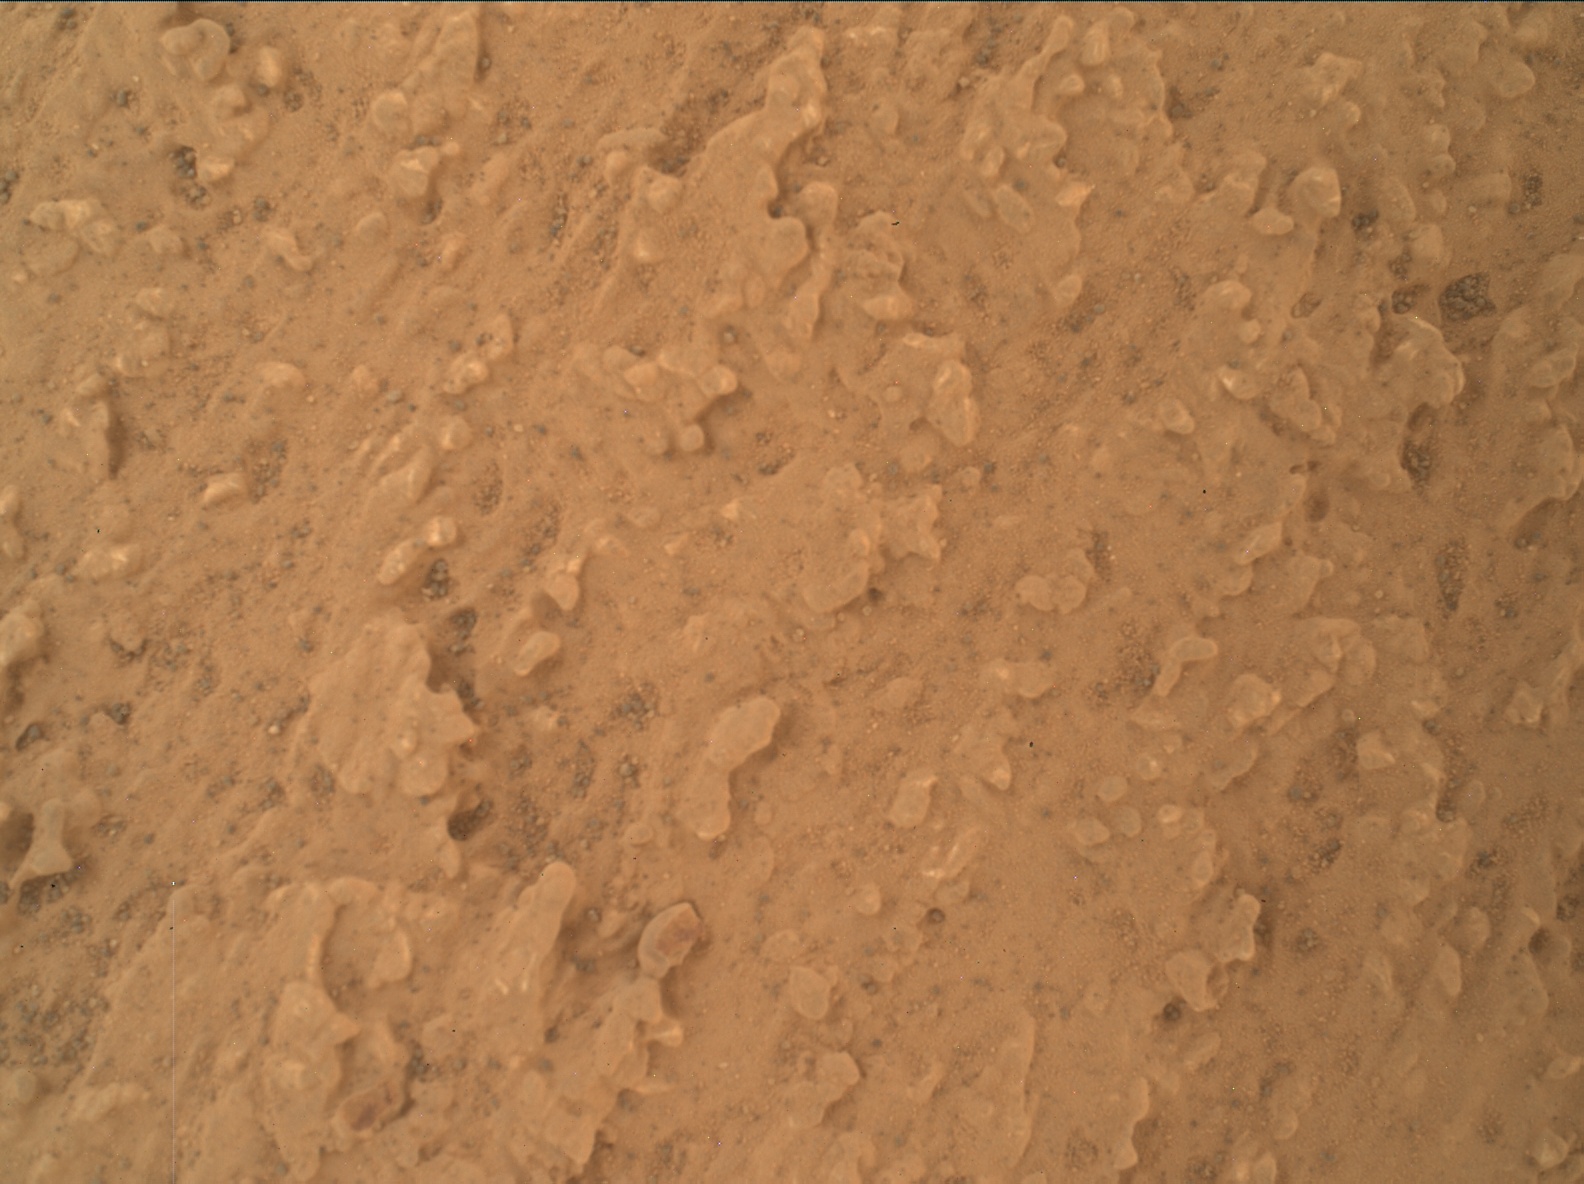 Nasa's Mars rover Curiosity acquired this image using its Mars Hand Lens Imager (MAHLI) on Sol 3217